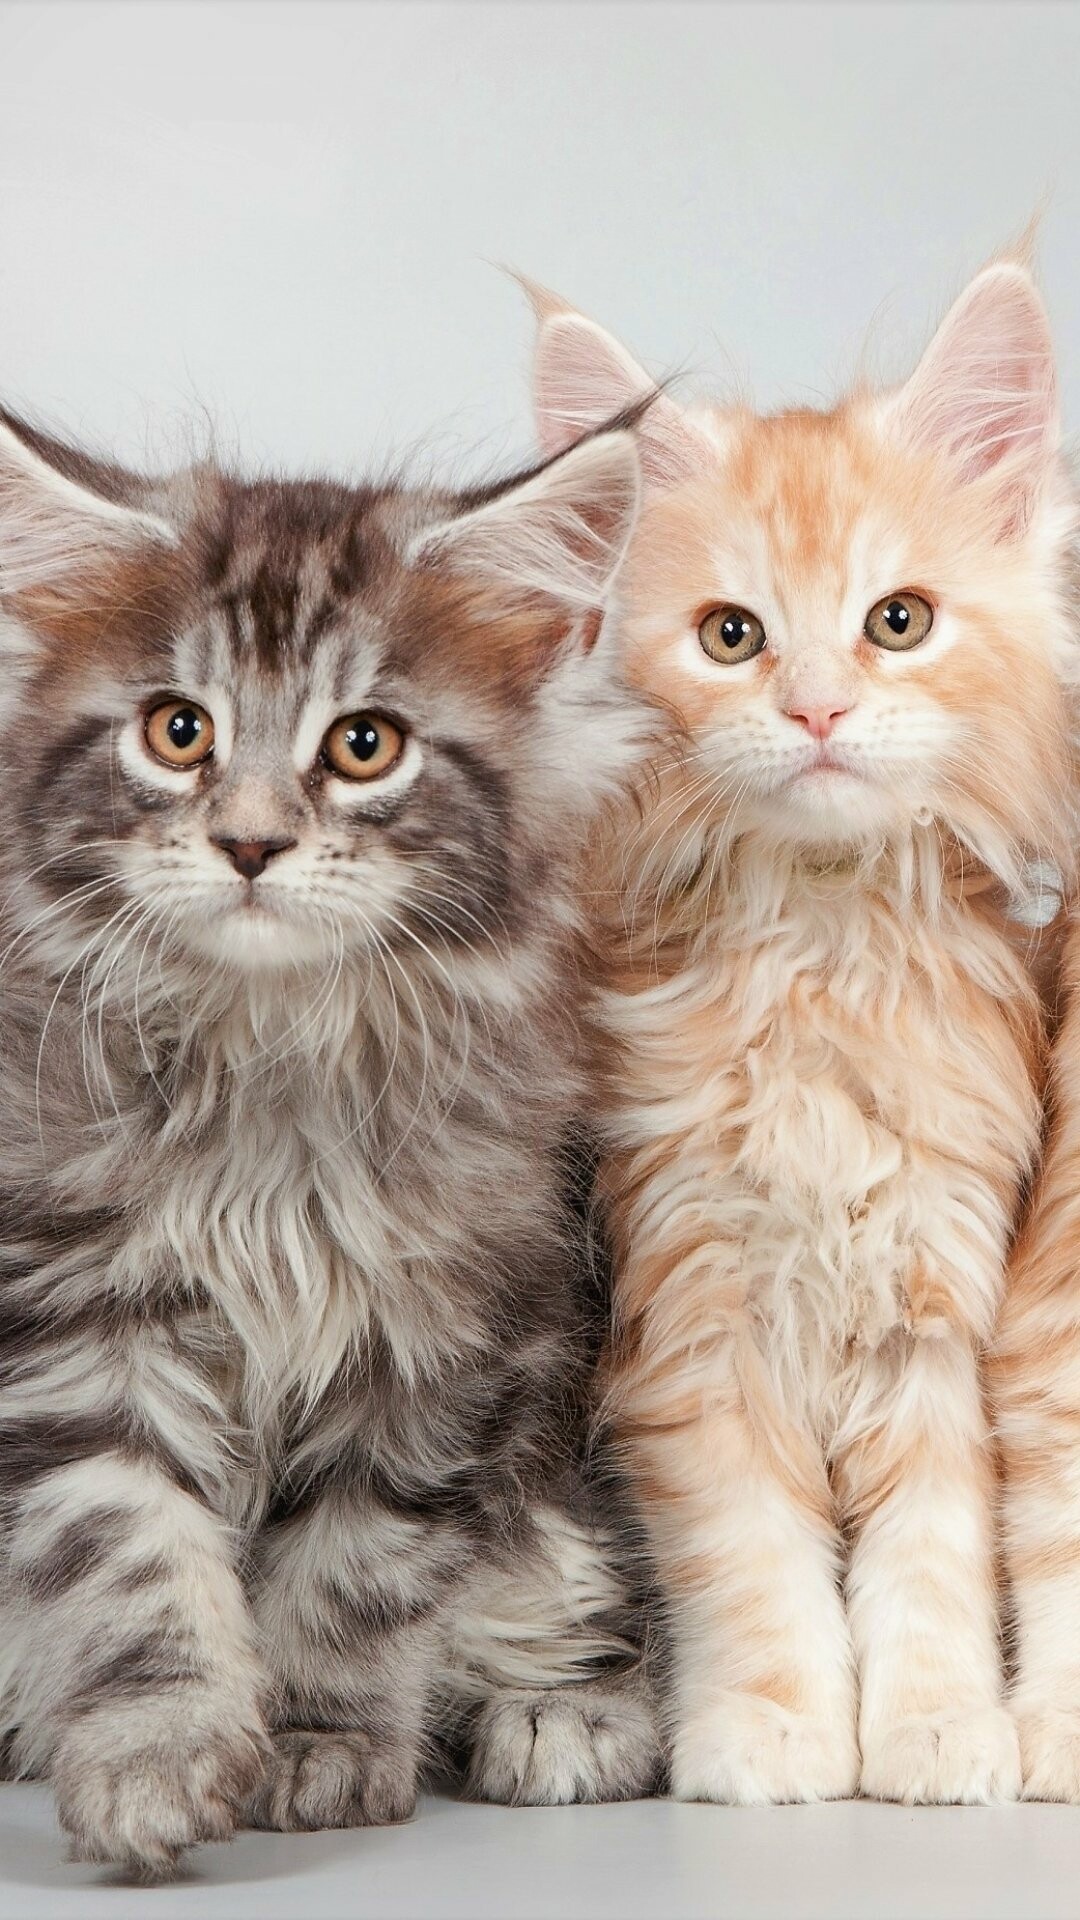 Maine Coon: They coexist peacefully with other household pets, including other cats and cat-friendly dogs. 1080x1920 Full HD Wallpaper.